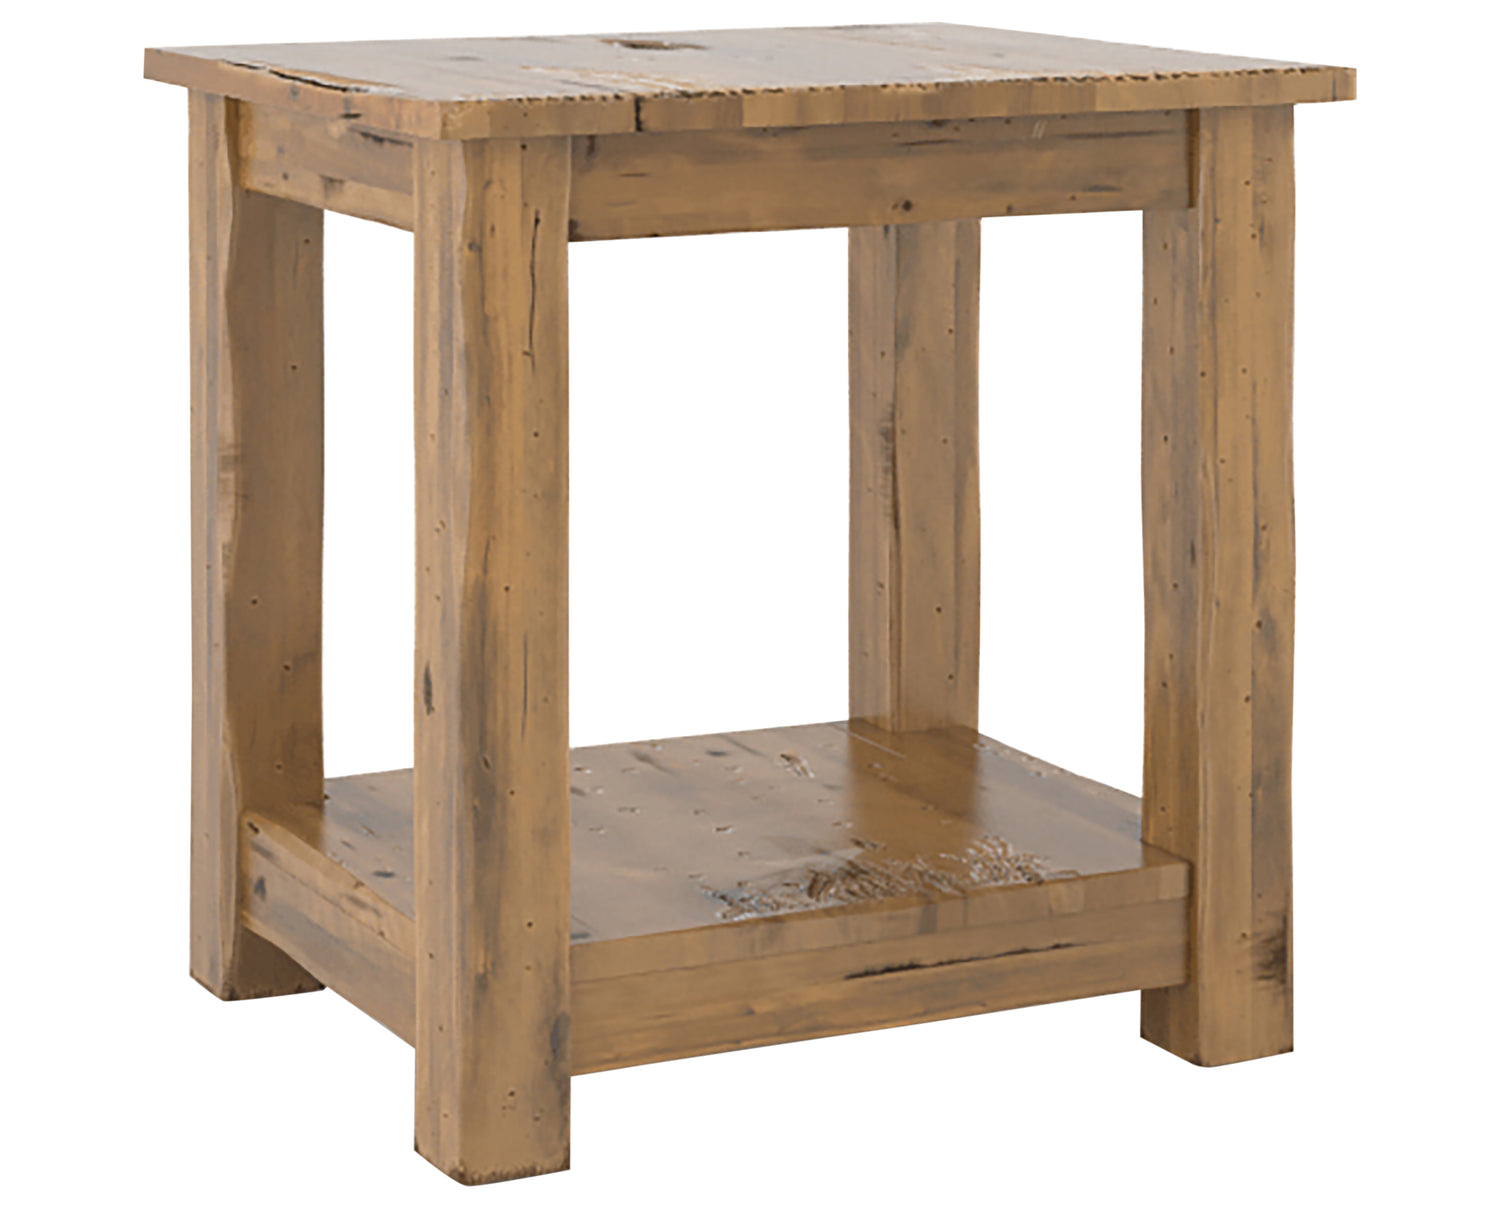 Oak Washed with HJ Legs | Canadel Champlain End Table 2420 | Valley Ridge Furniture